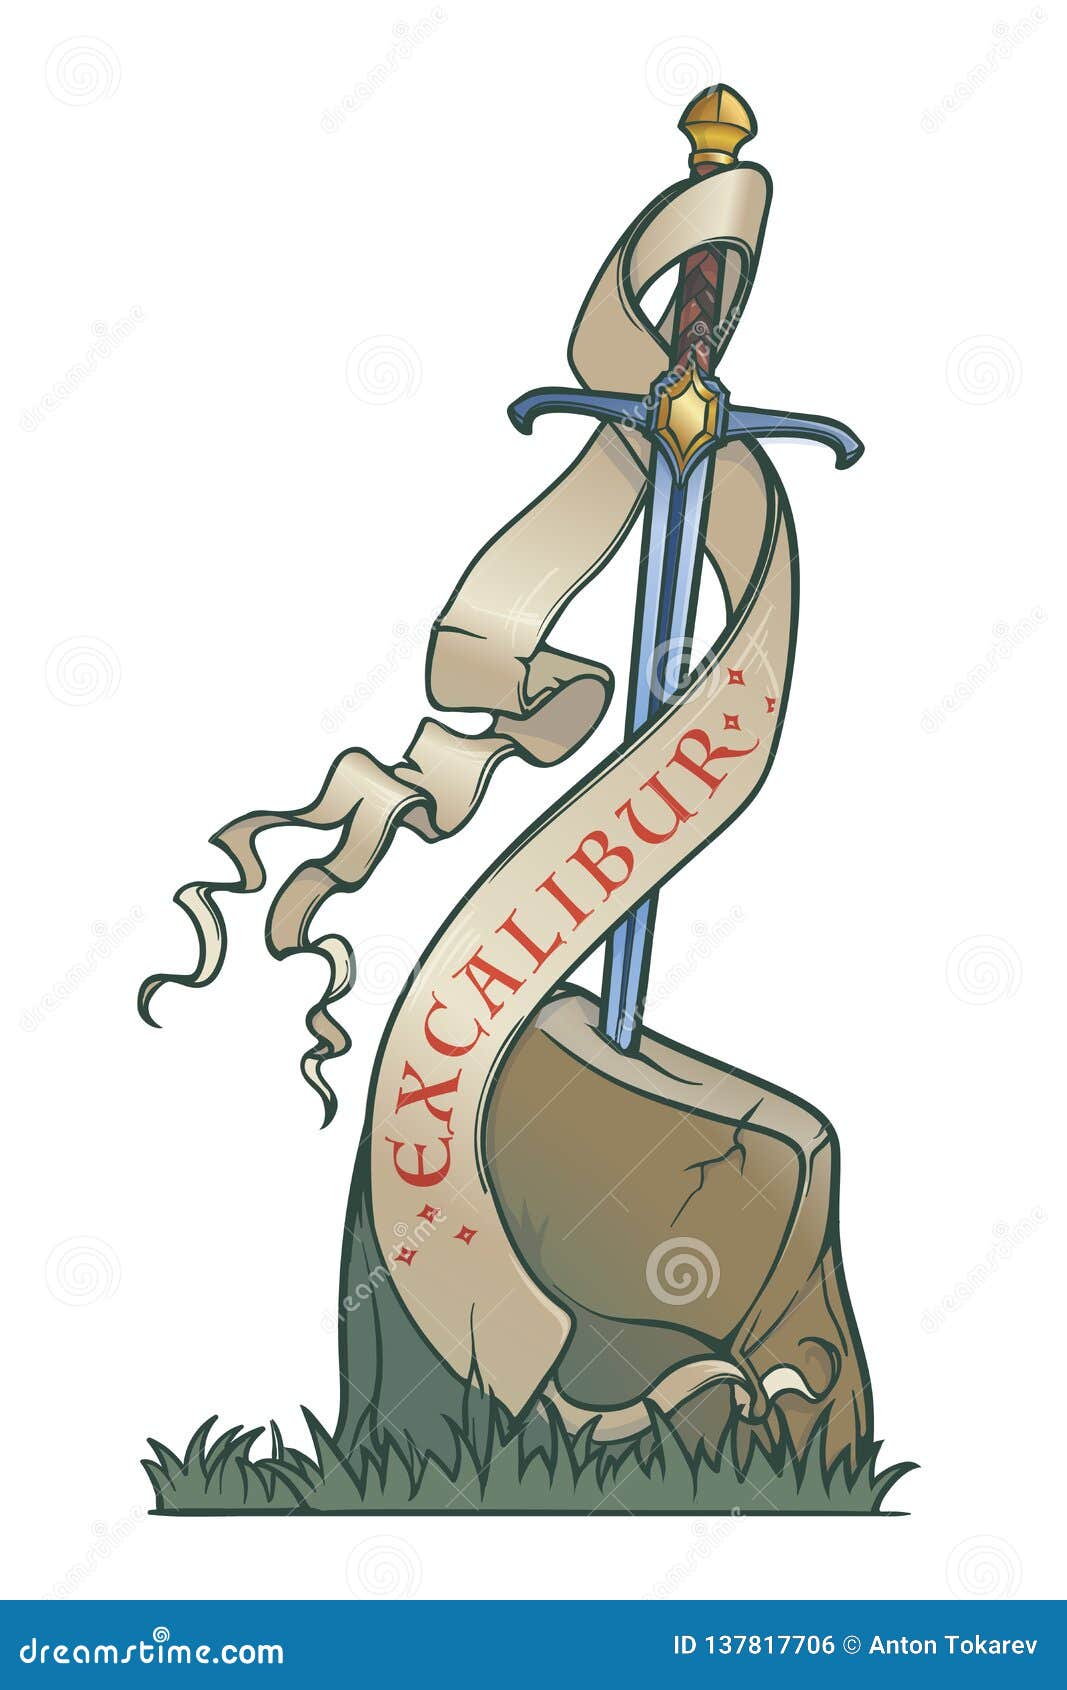 excalibur sword trapped in stone. decorative banner. iconic scene from the medieval european stories about king arthur.